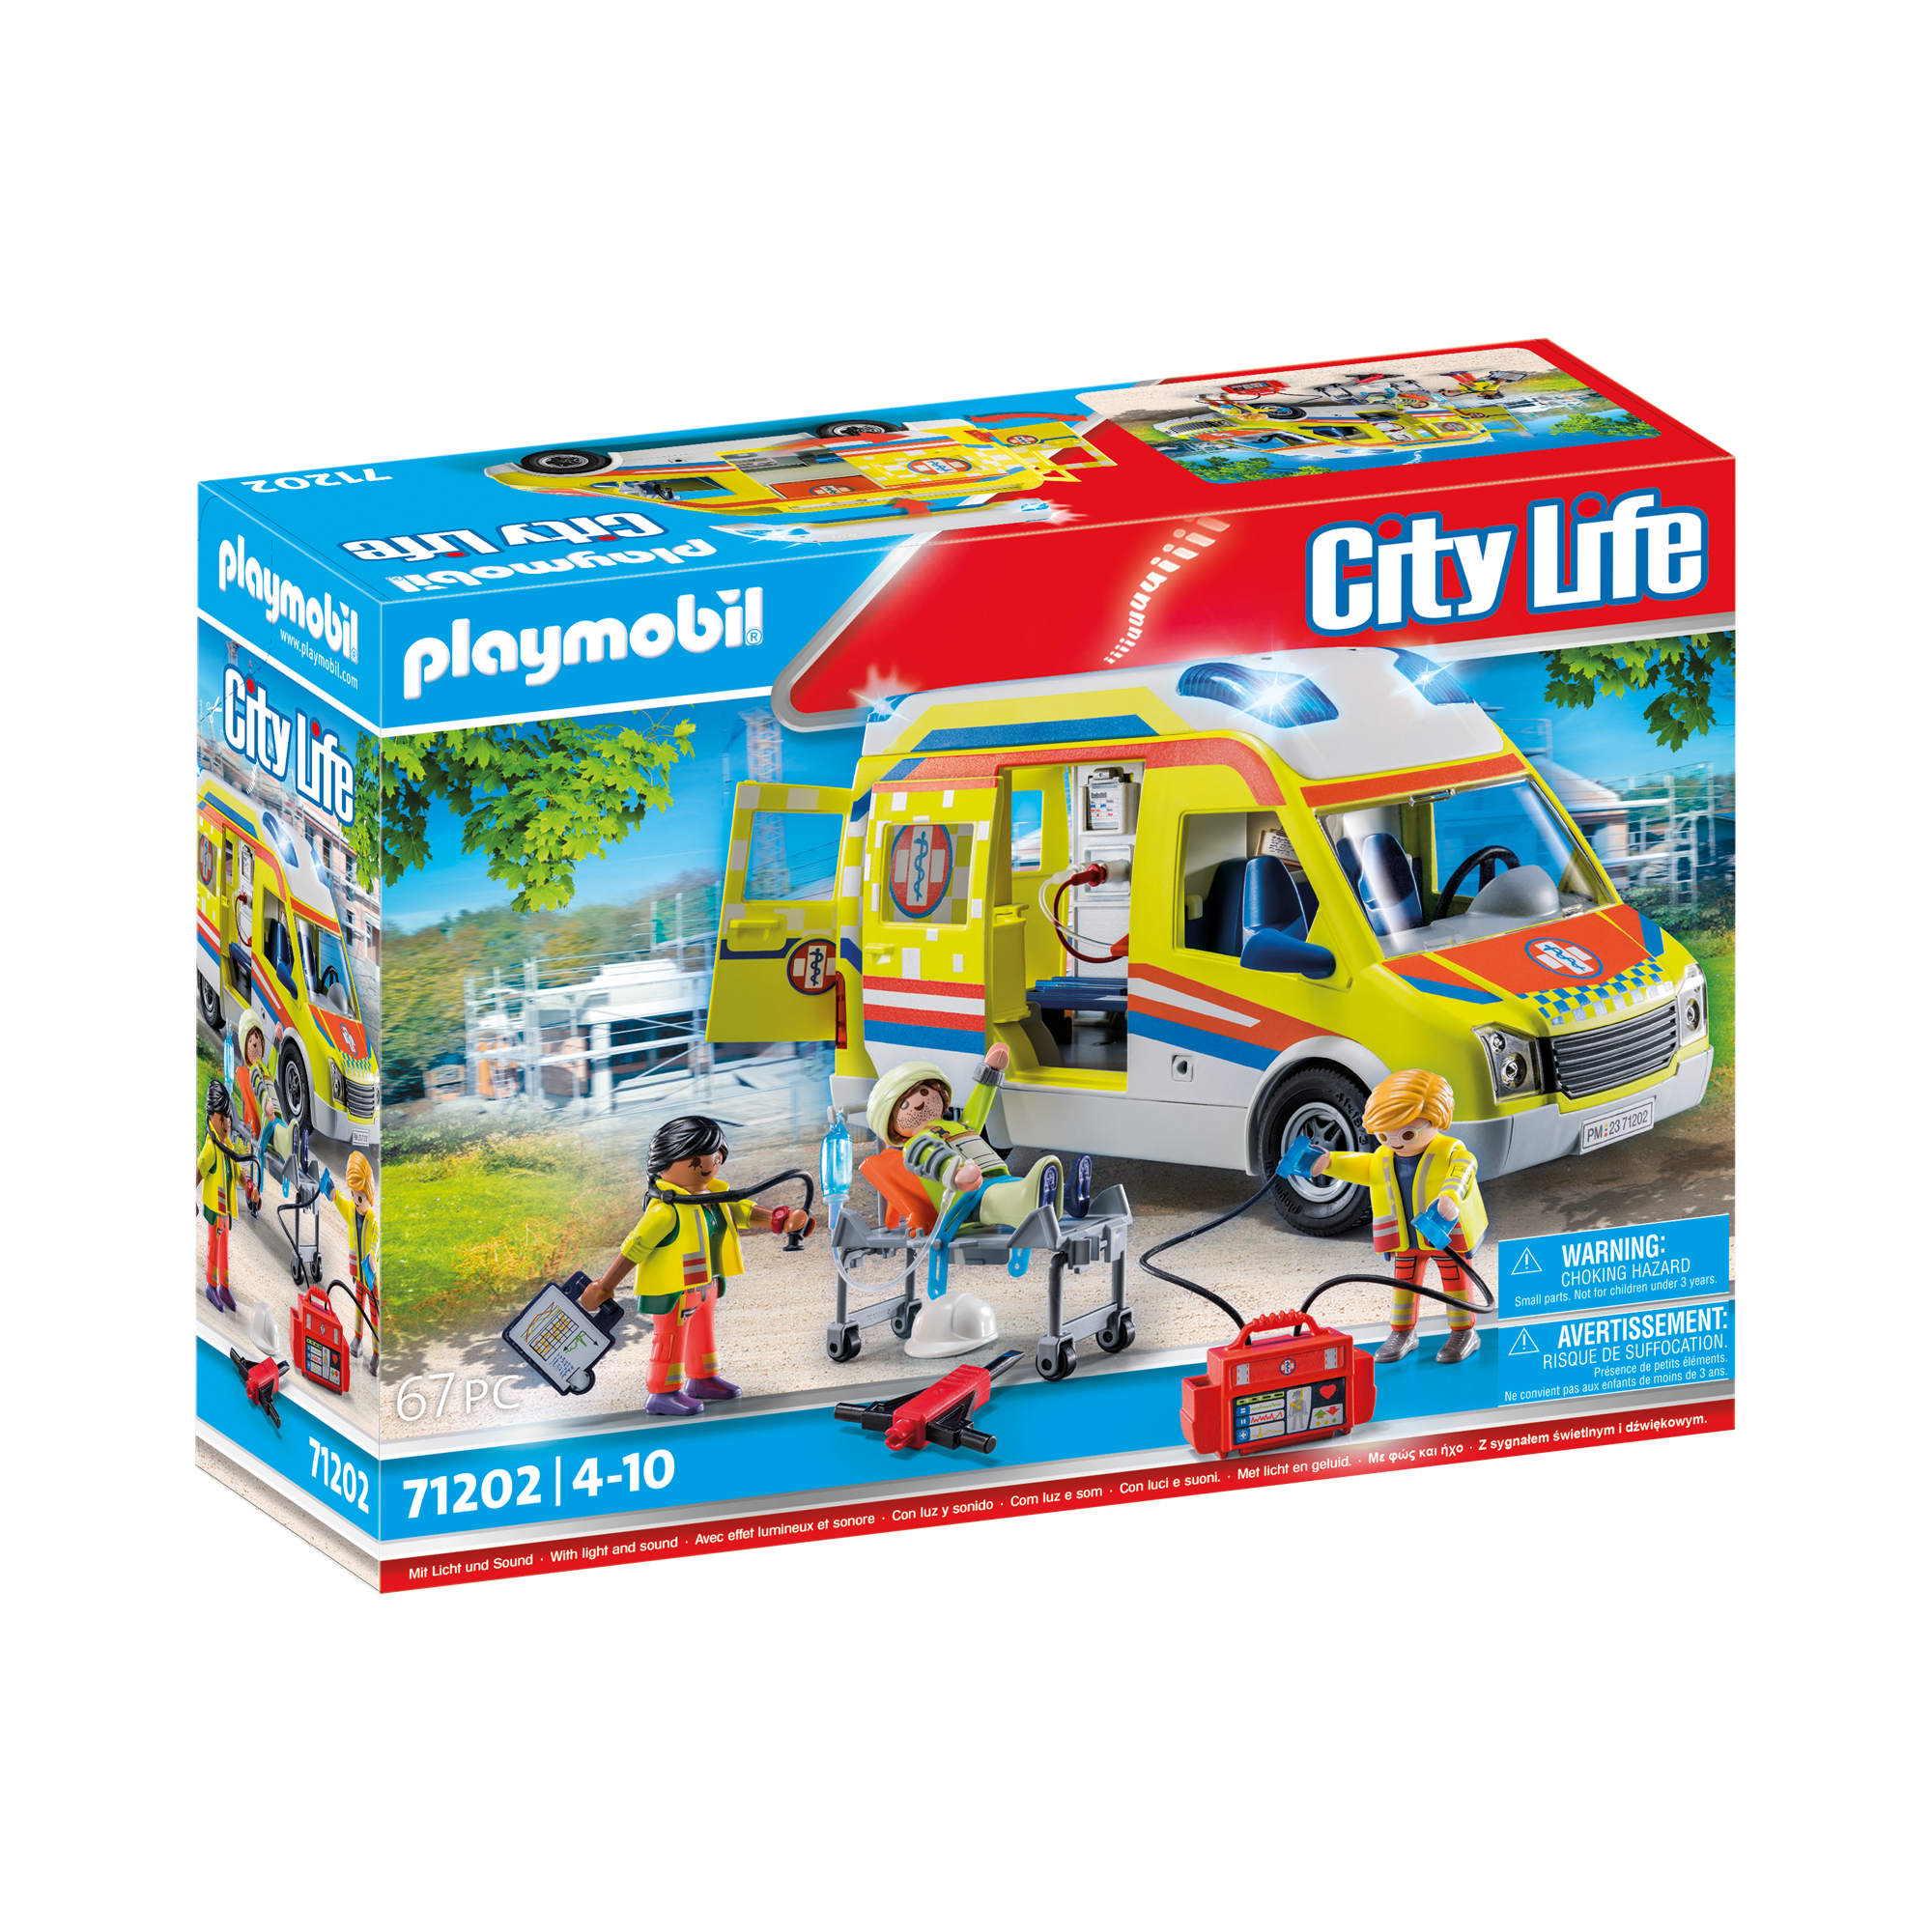 Playmobil-City Life - Ambulance with Lights and Sound-71202-Legacy Toys